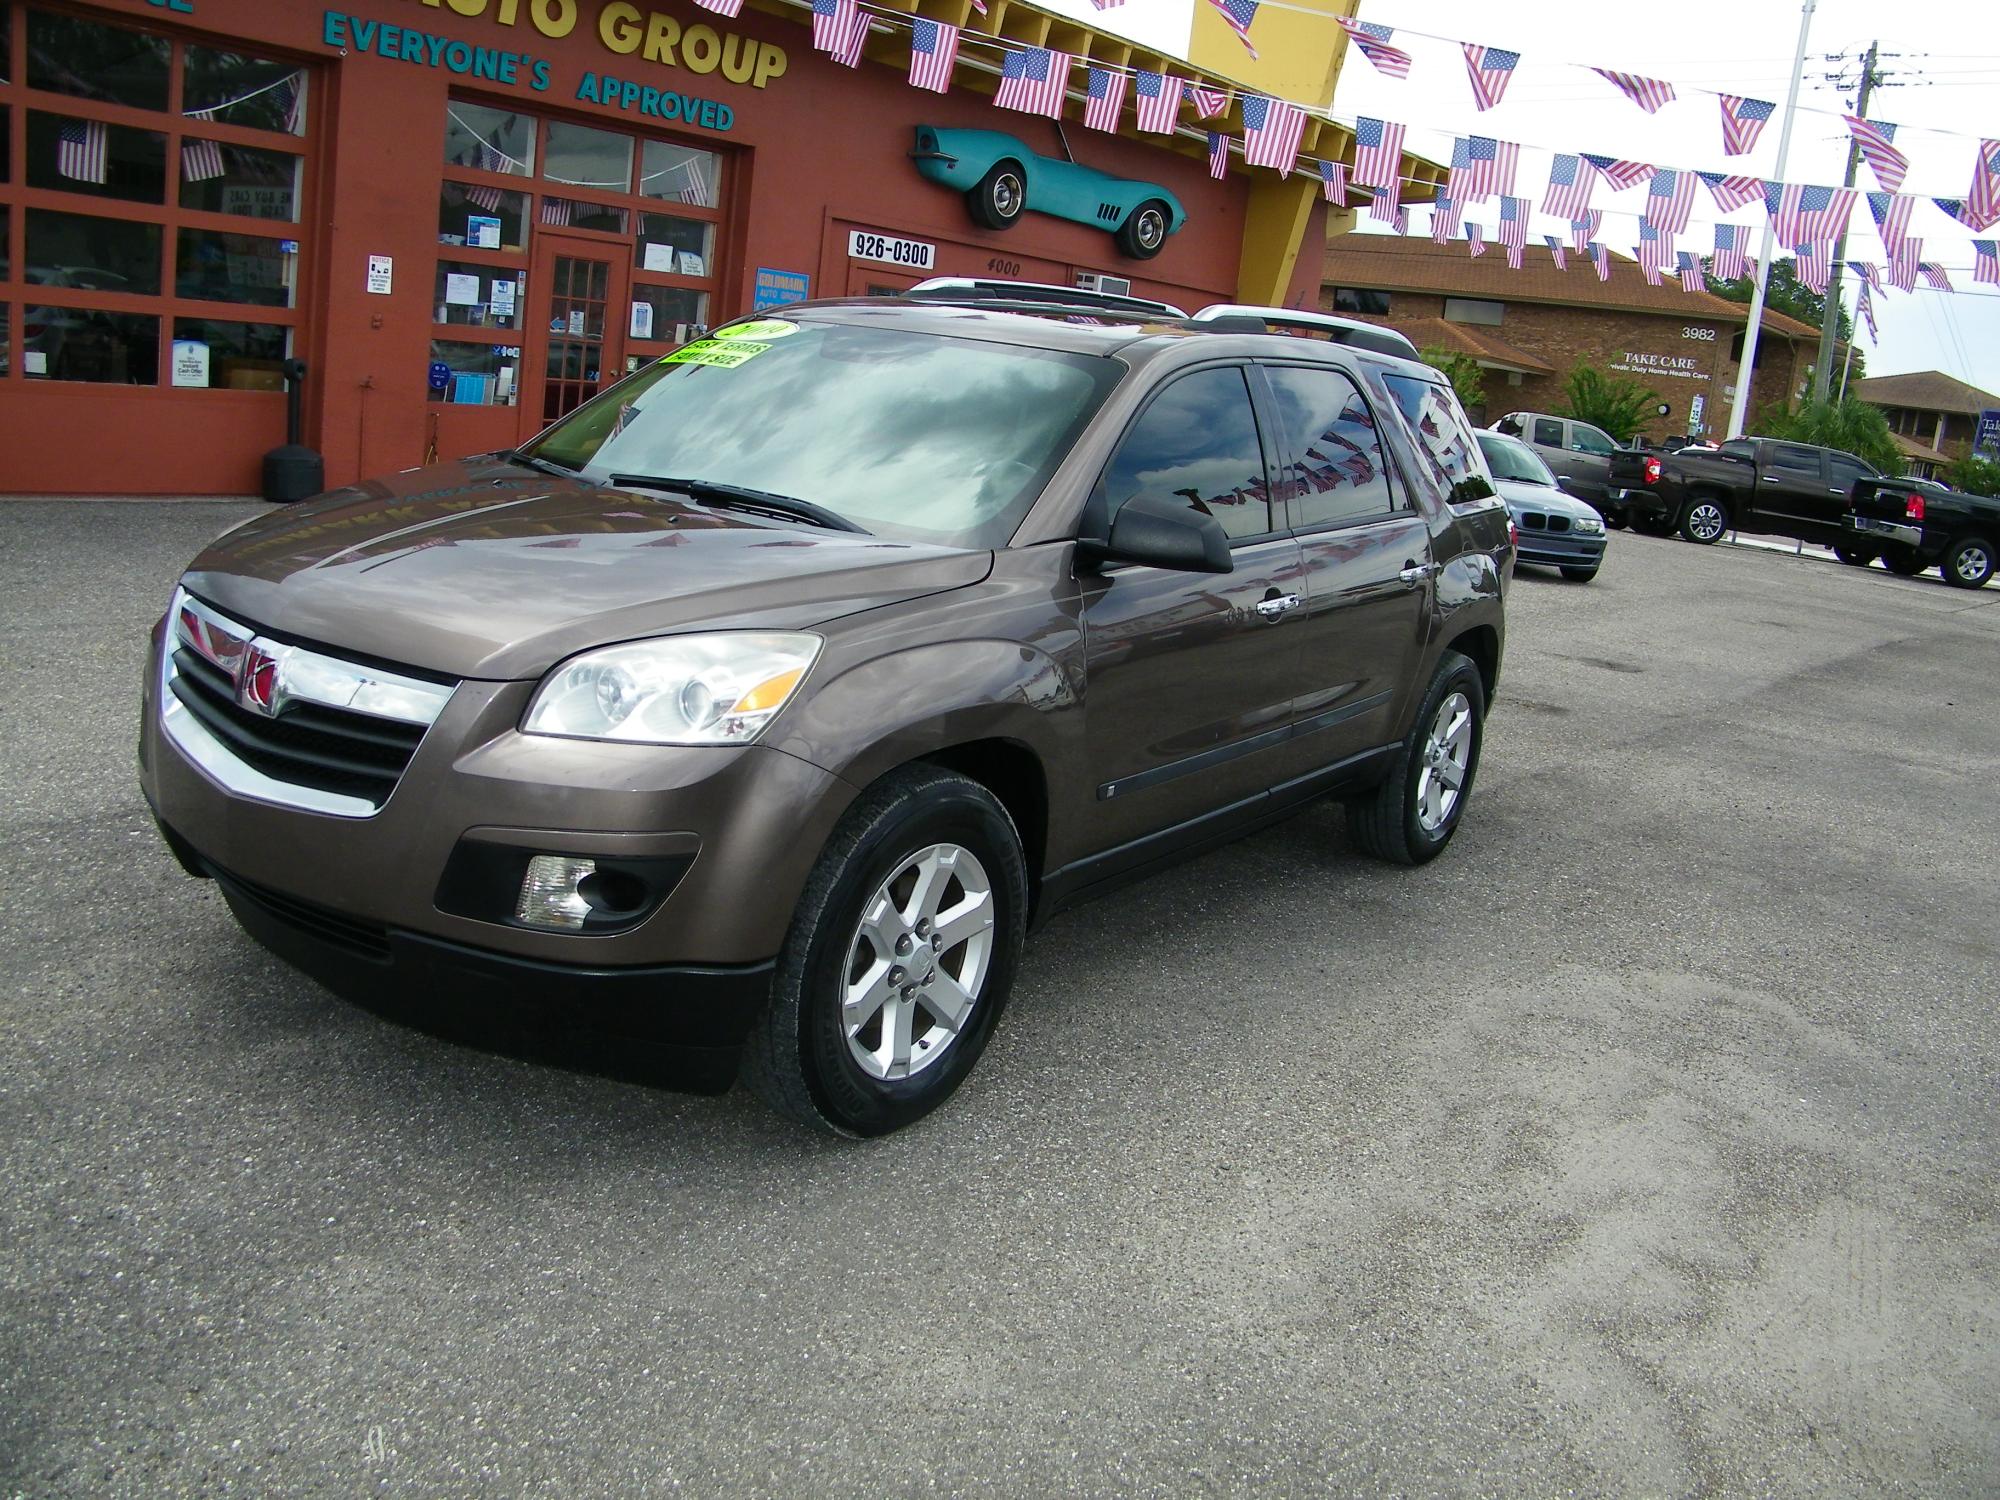 2008 Saturn Outlook XE FWD